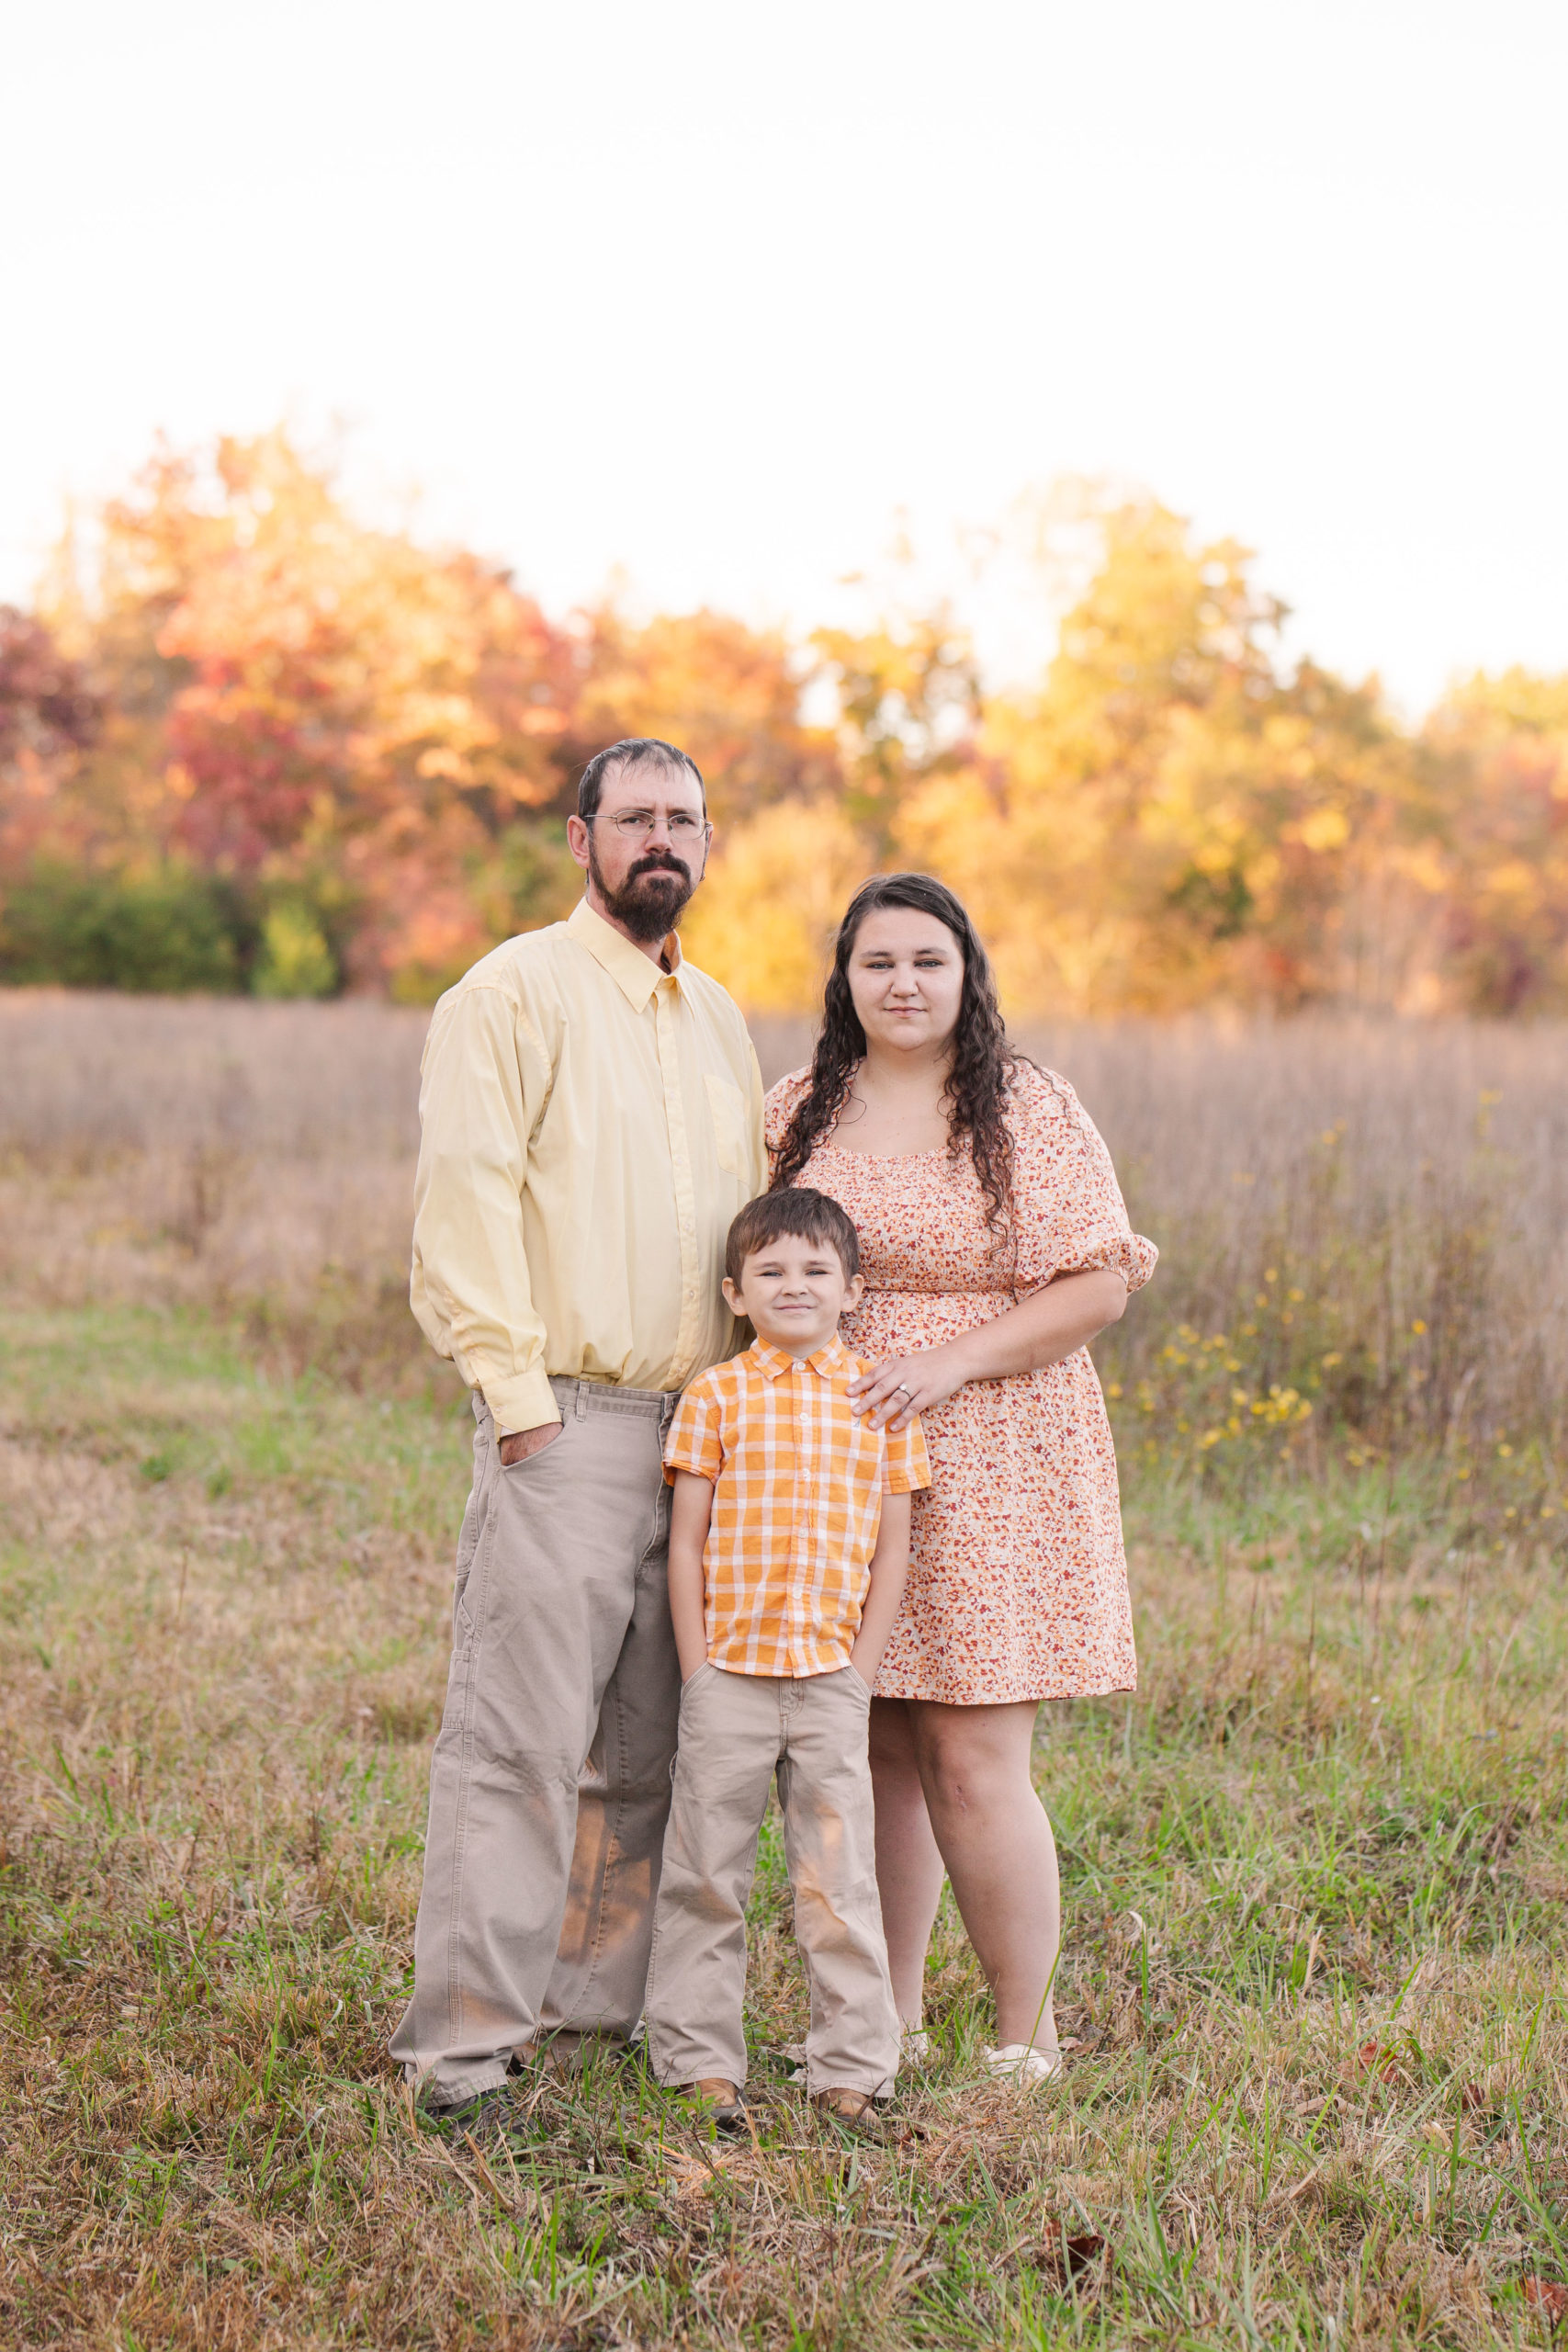 family portrait in a field with fall foliage